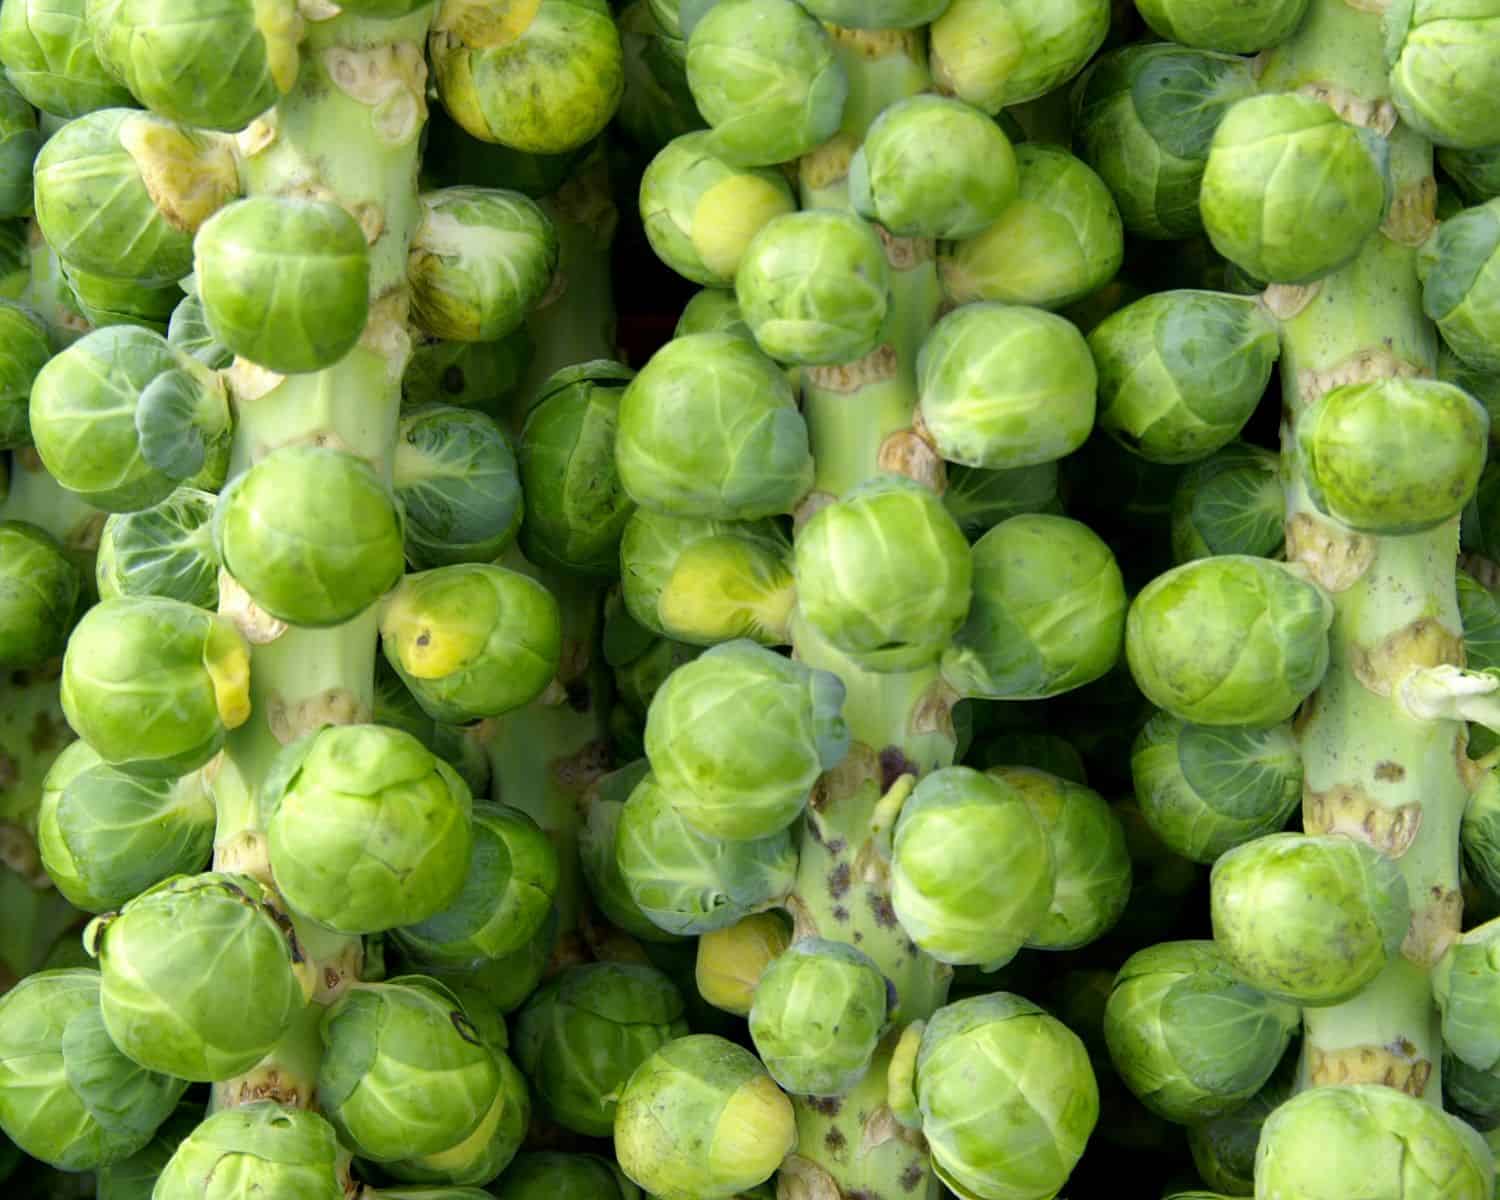 stalks of brussels sprouts fill the frame of a photo.